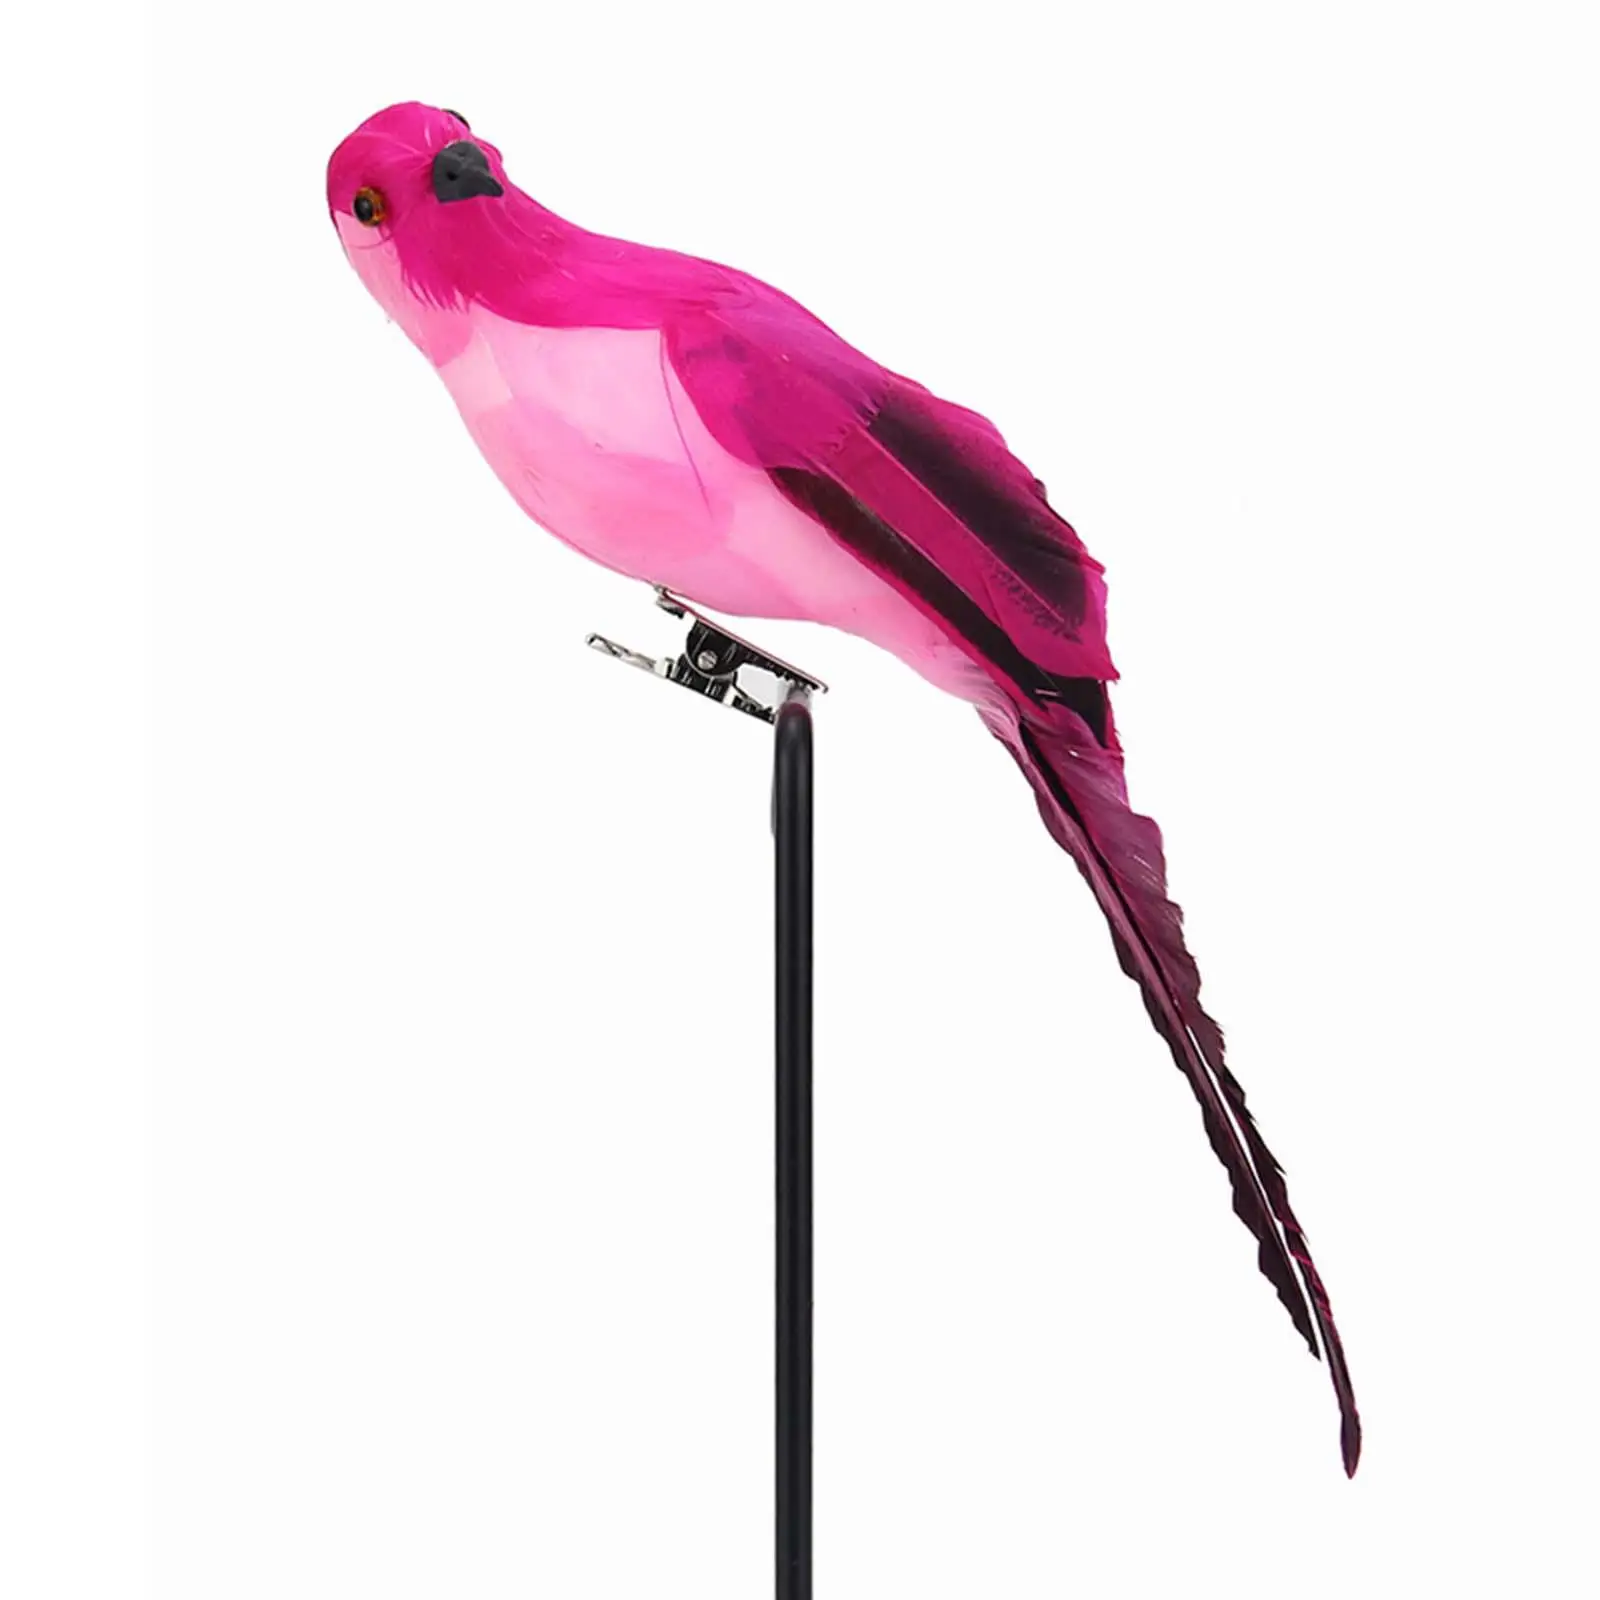  Macaw Artificial Birds  Housewarming Gifts Bird Parrot Model Feather Parrot for Landscape Wedding Wall Tree Outsideration